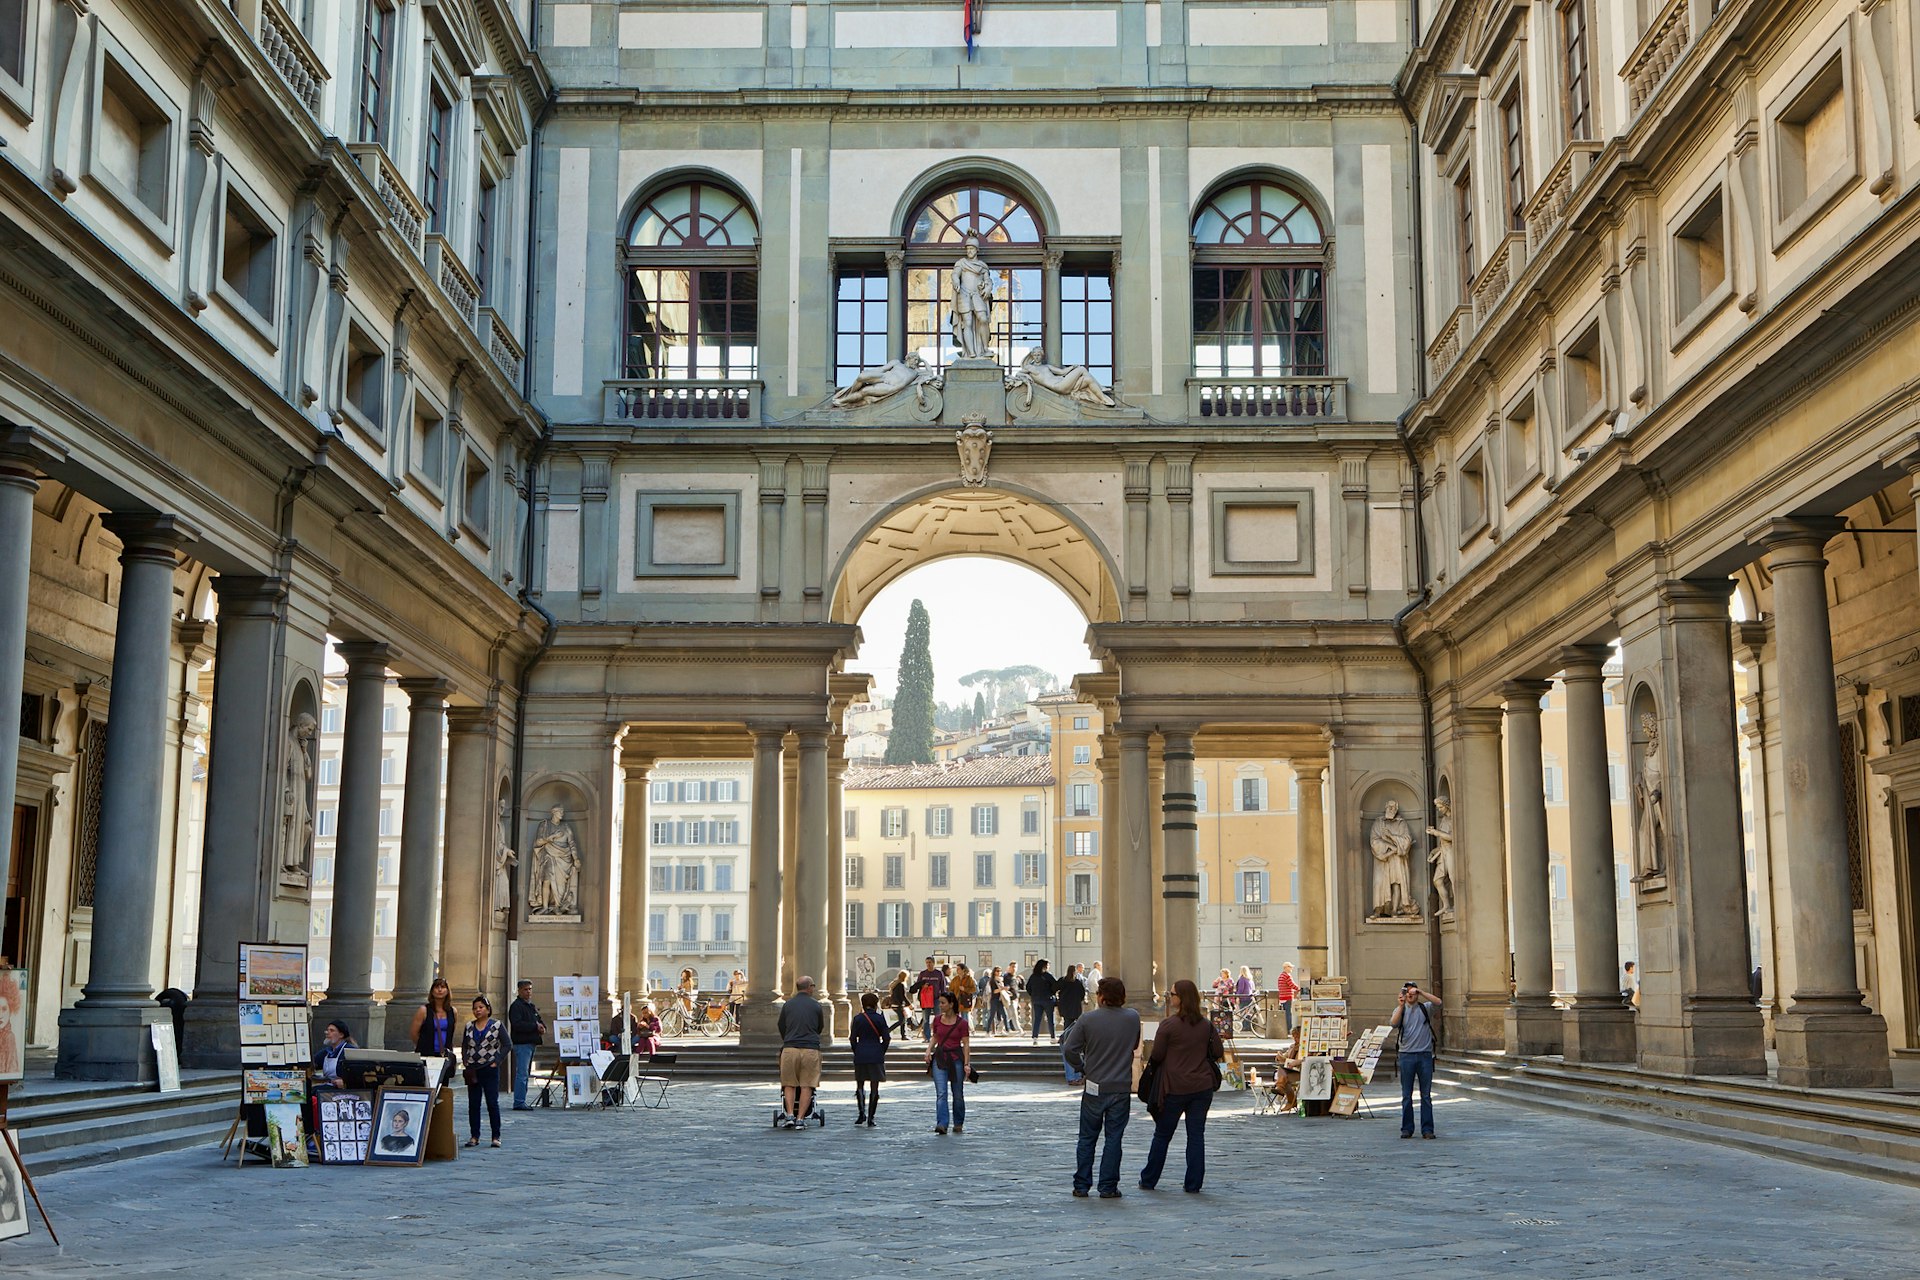 People stand in a vast arcade with Renaissance sculptures adorning the walls